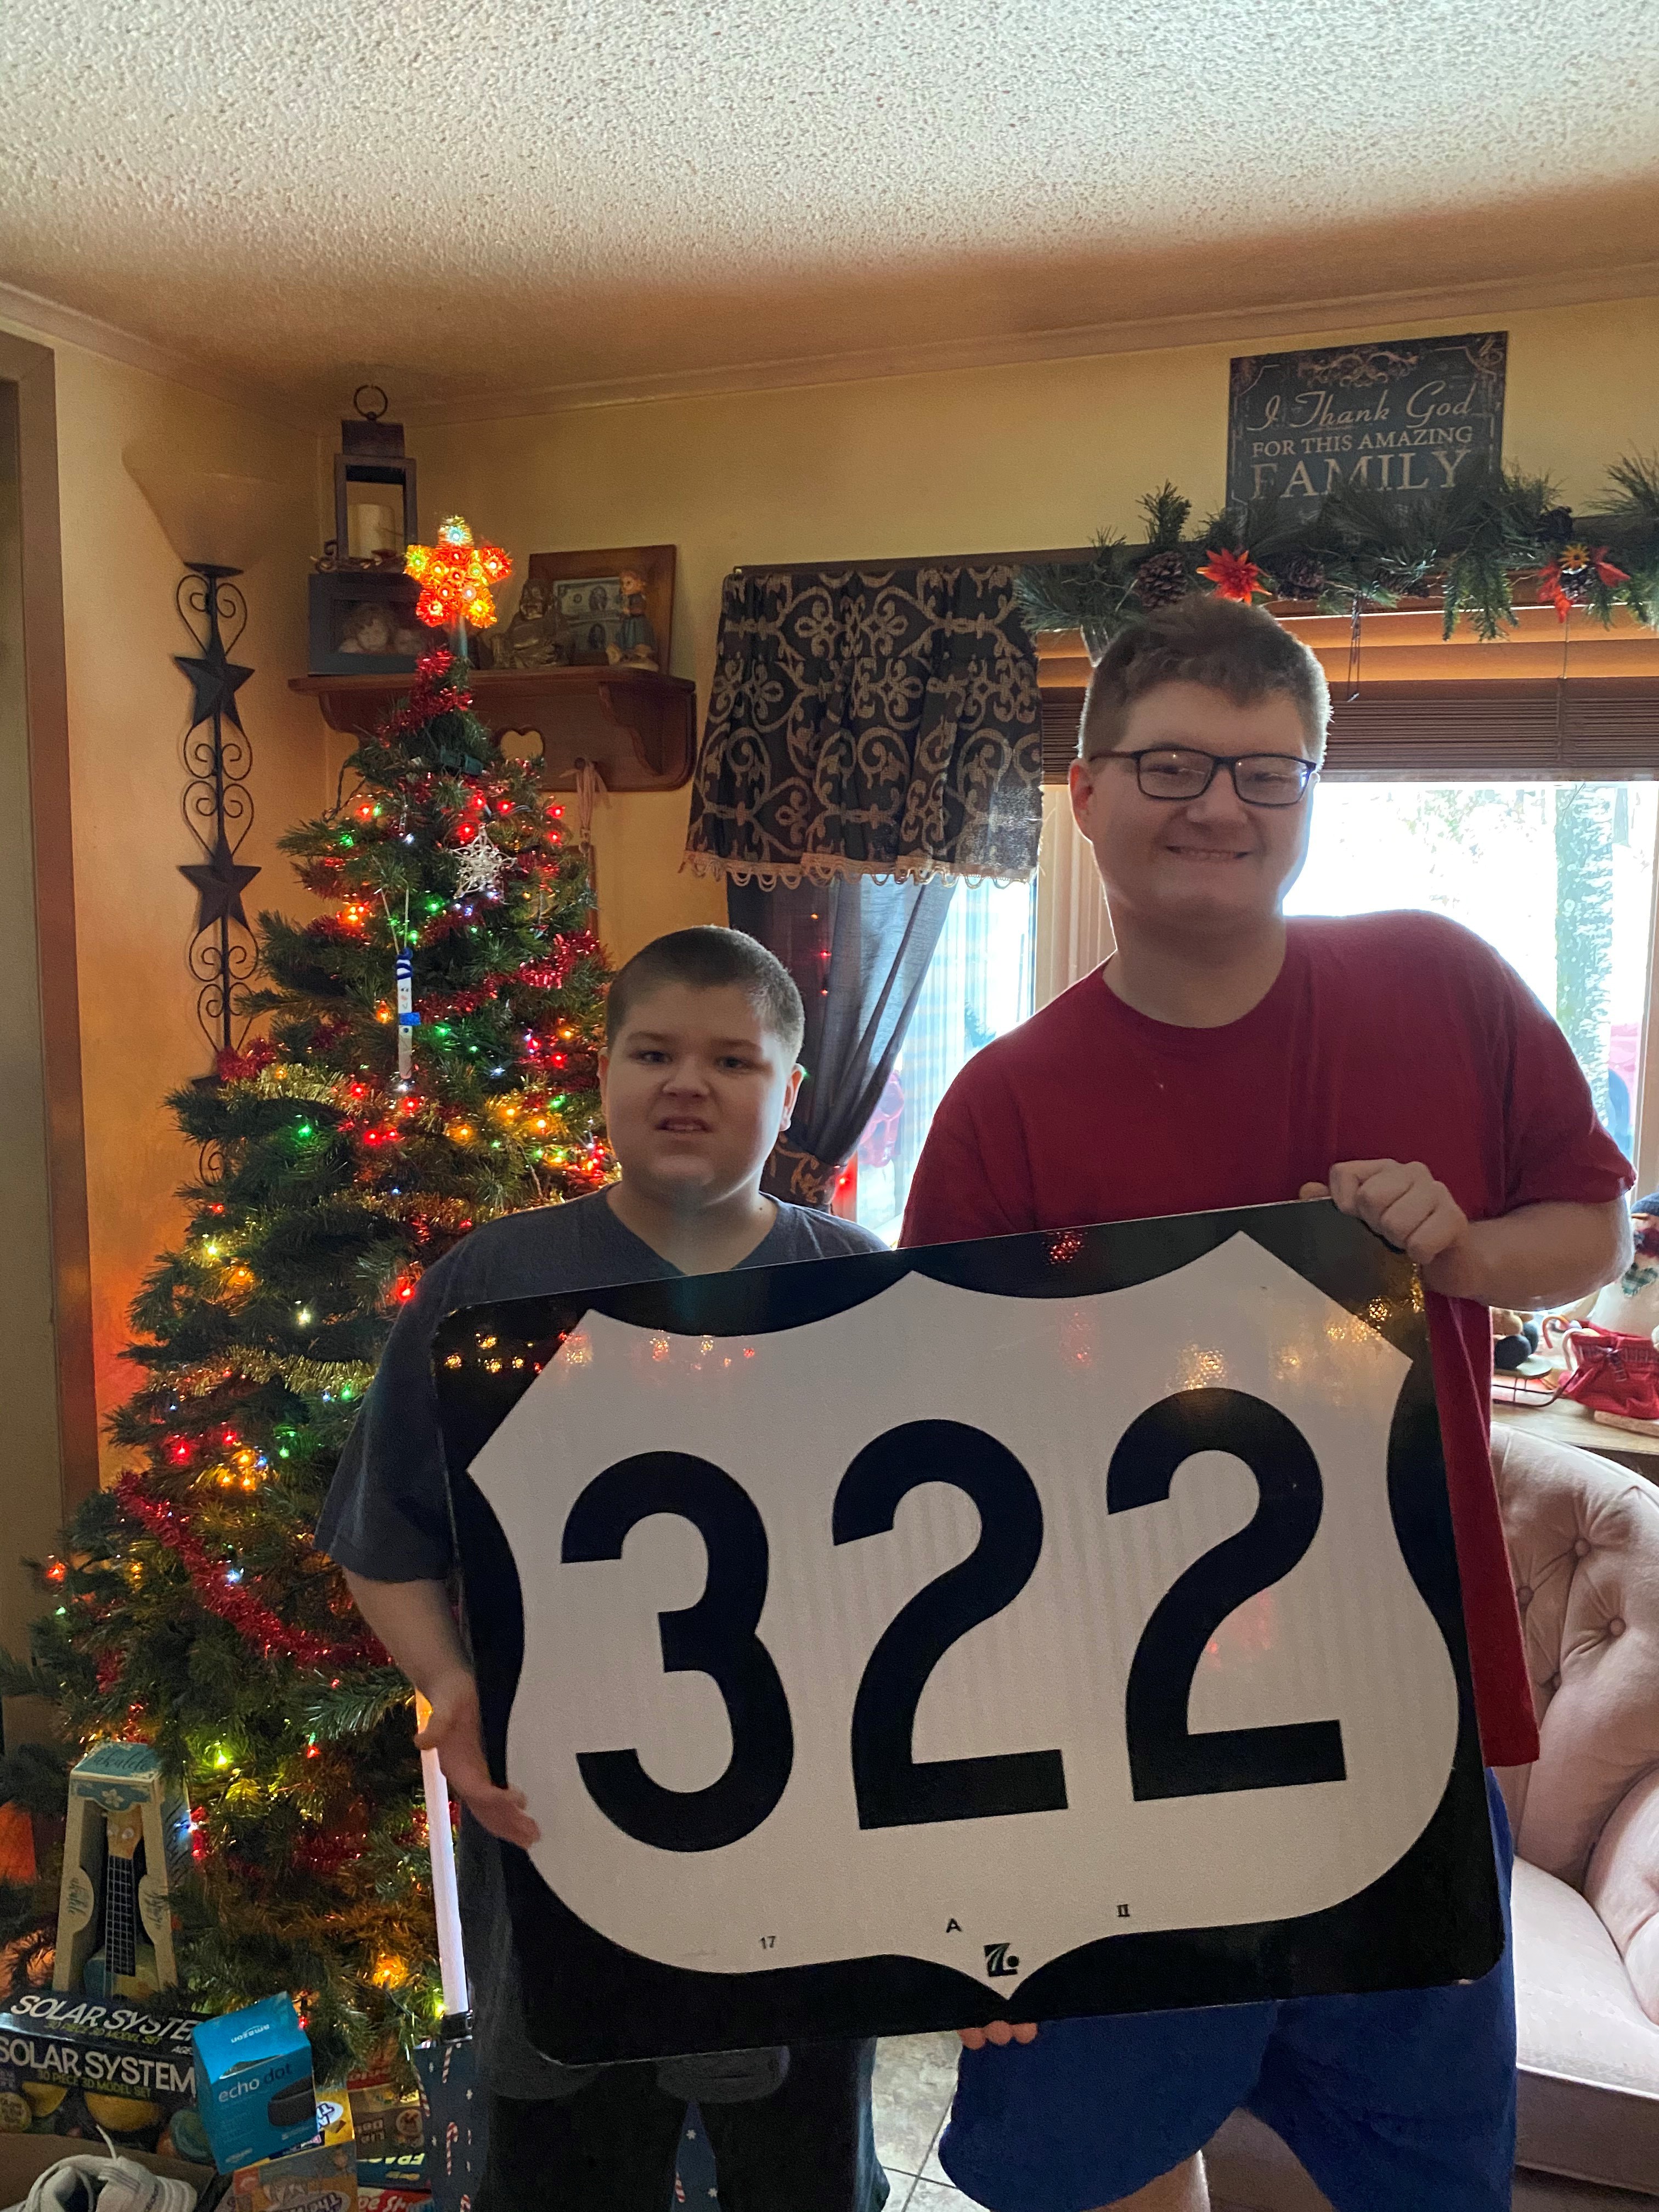 Parker and William Bowman holding Route 322 sign